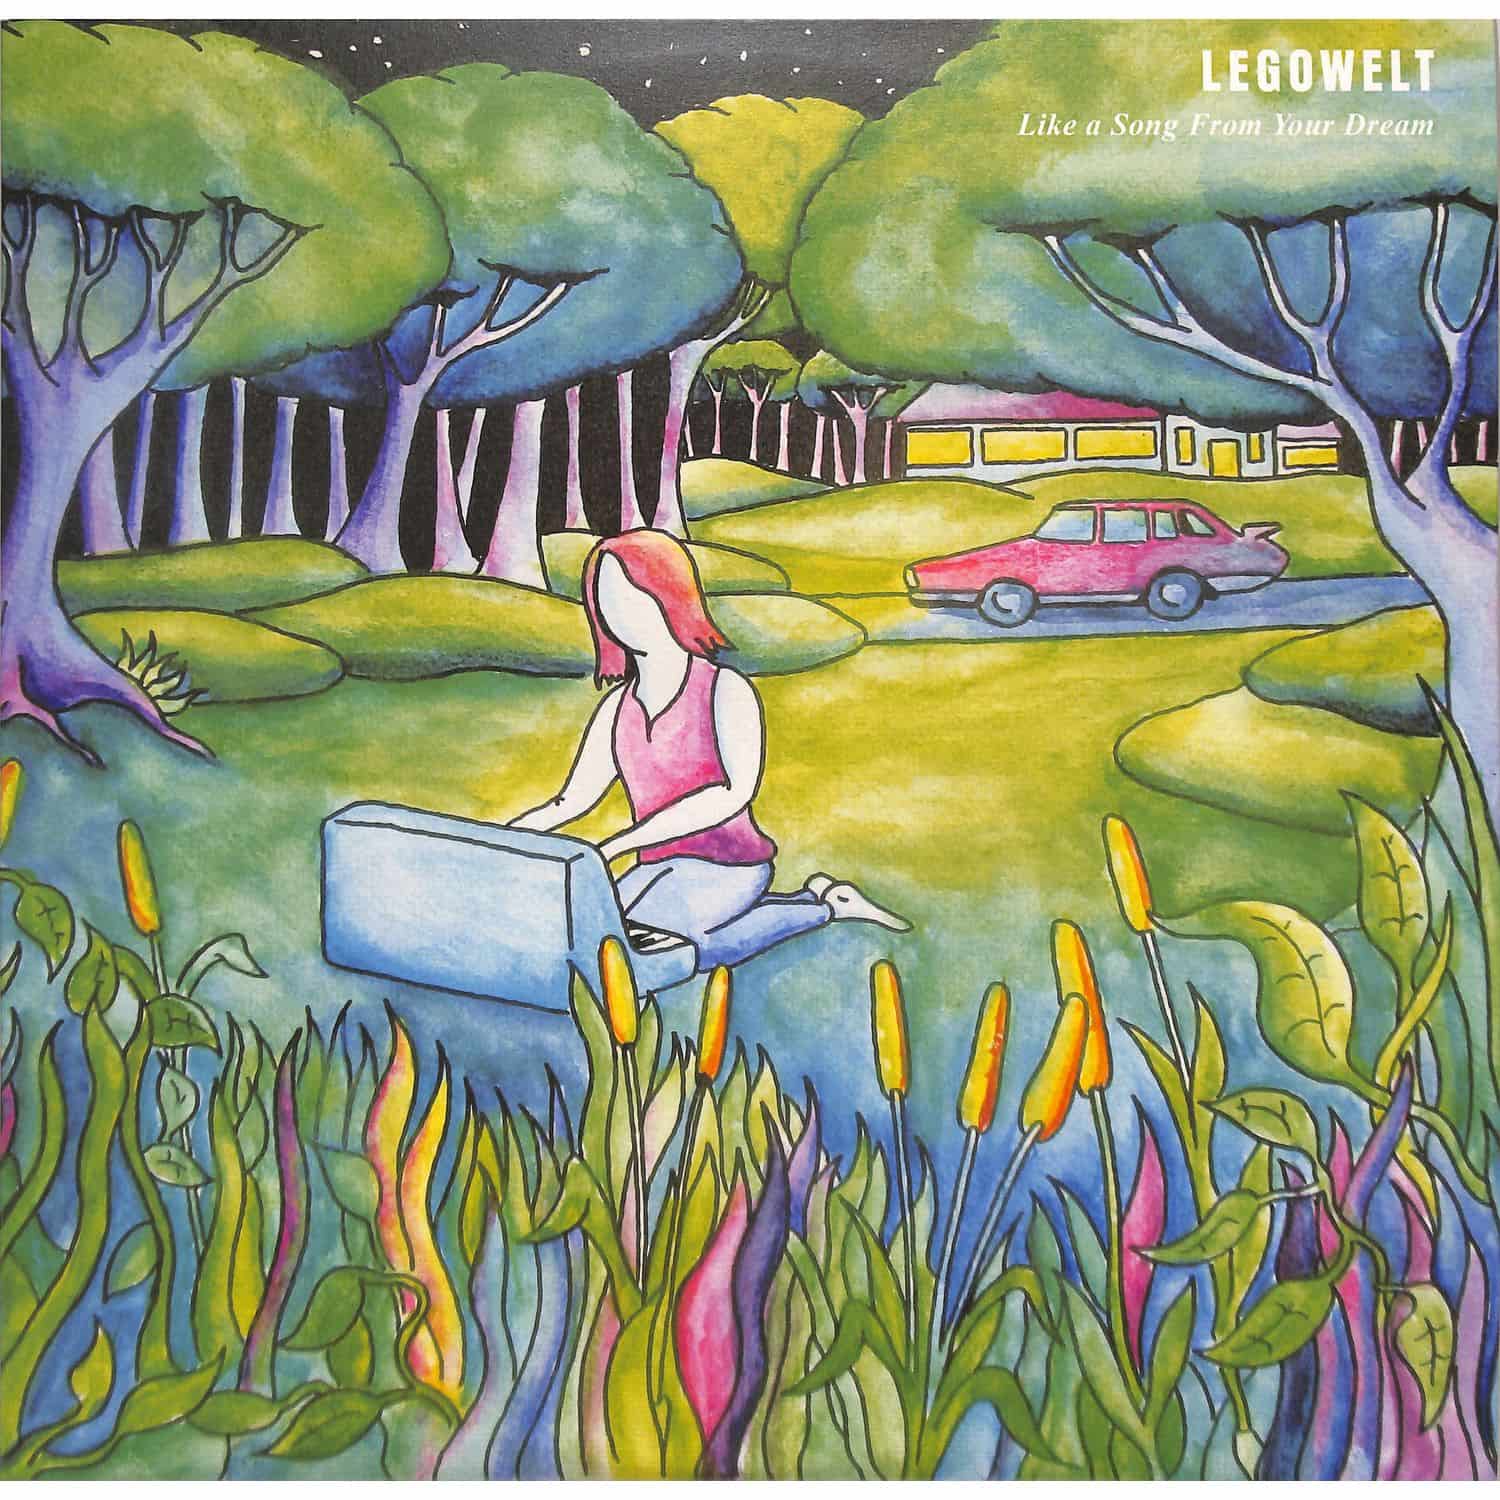 Legowelt - LIKE A SONG FROM YOUR DREAM 